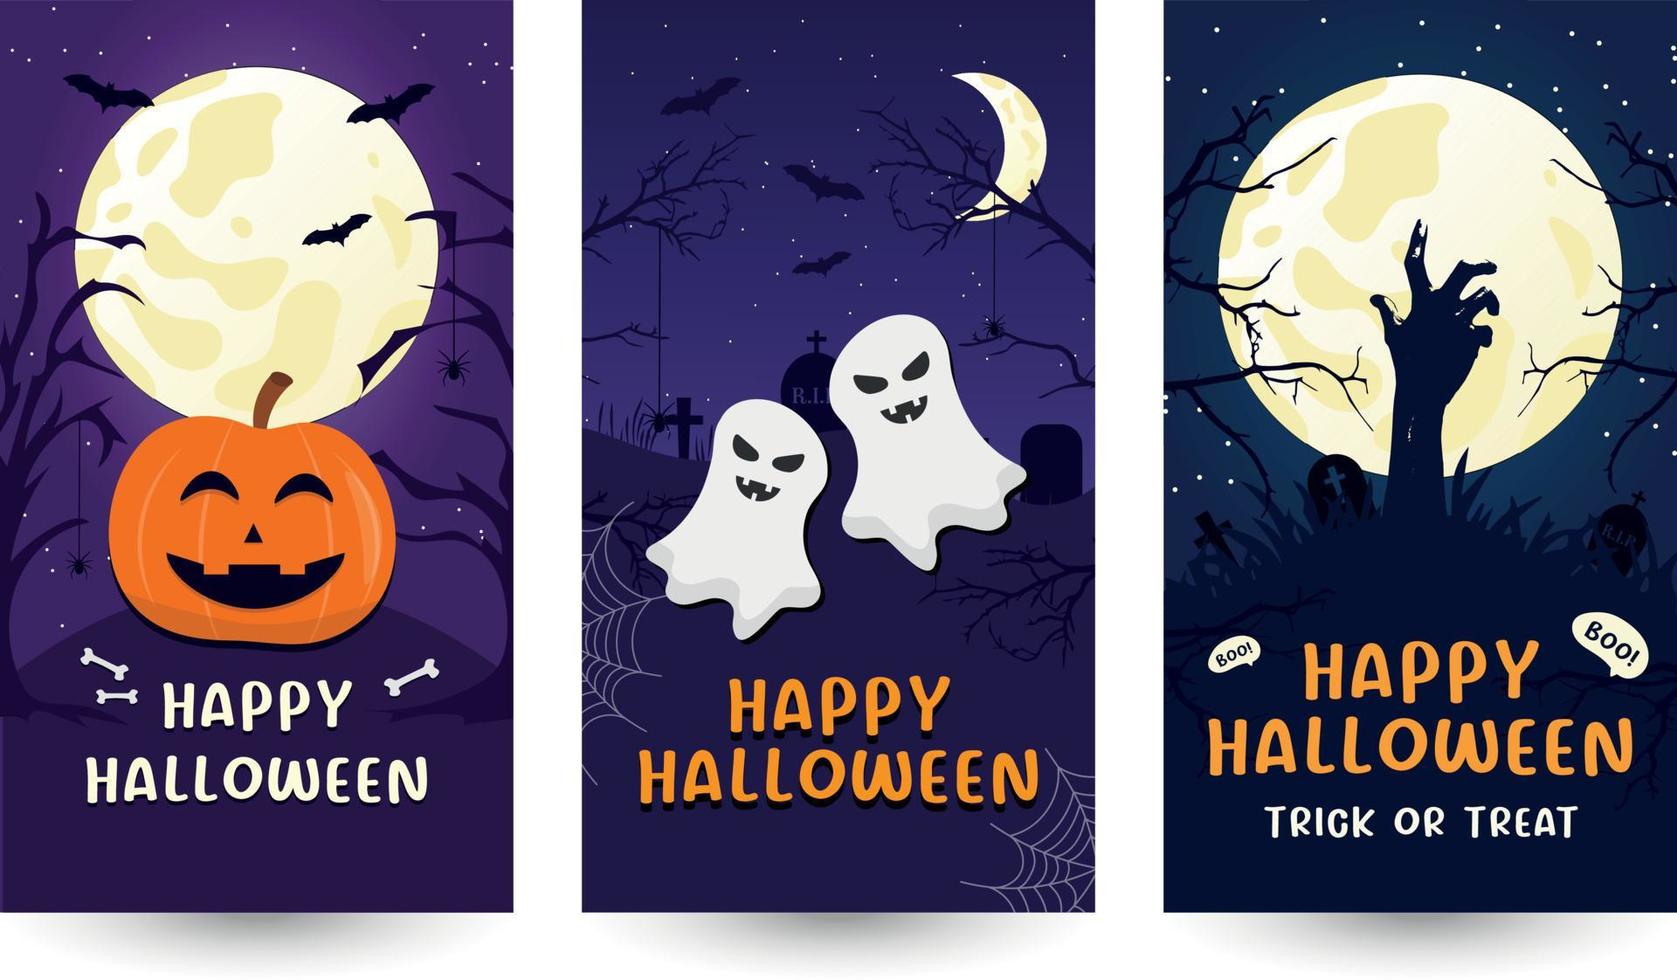 Halloween stories collection in a flat style, social media template with traditional symbols vector